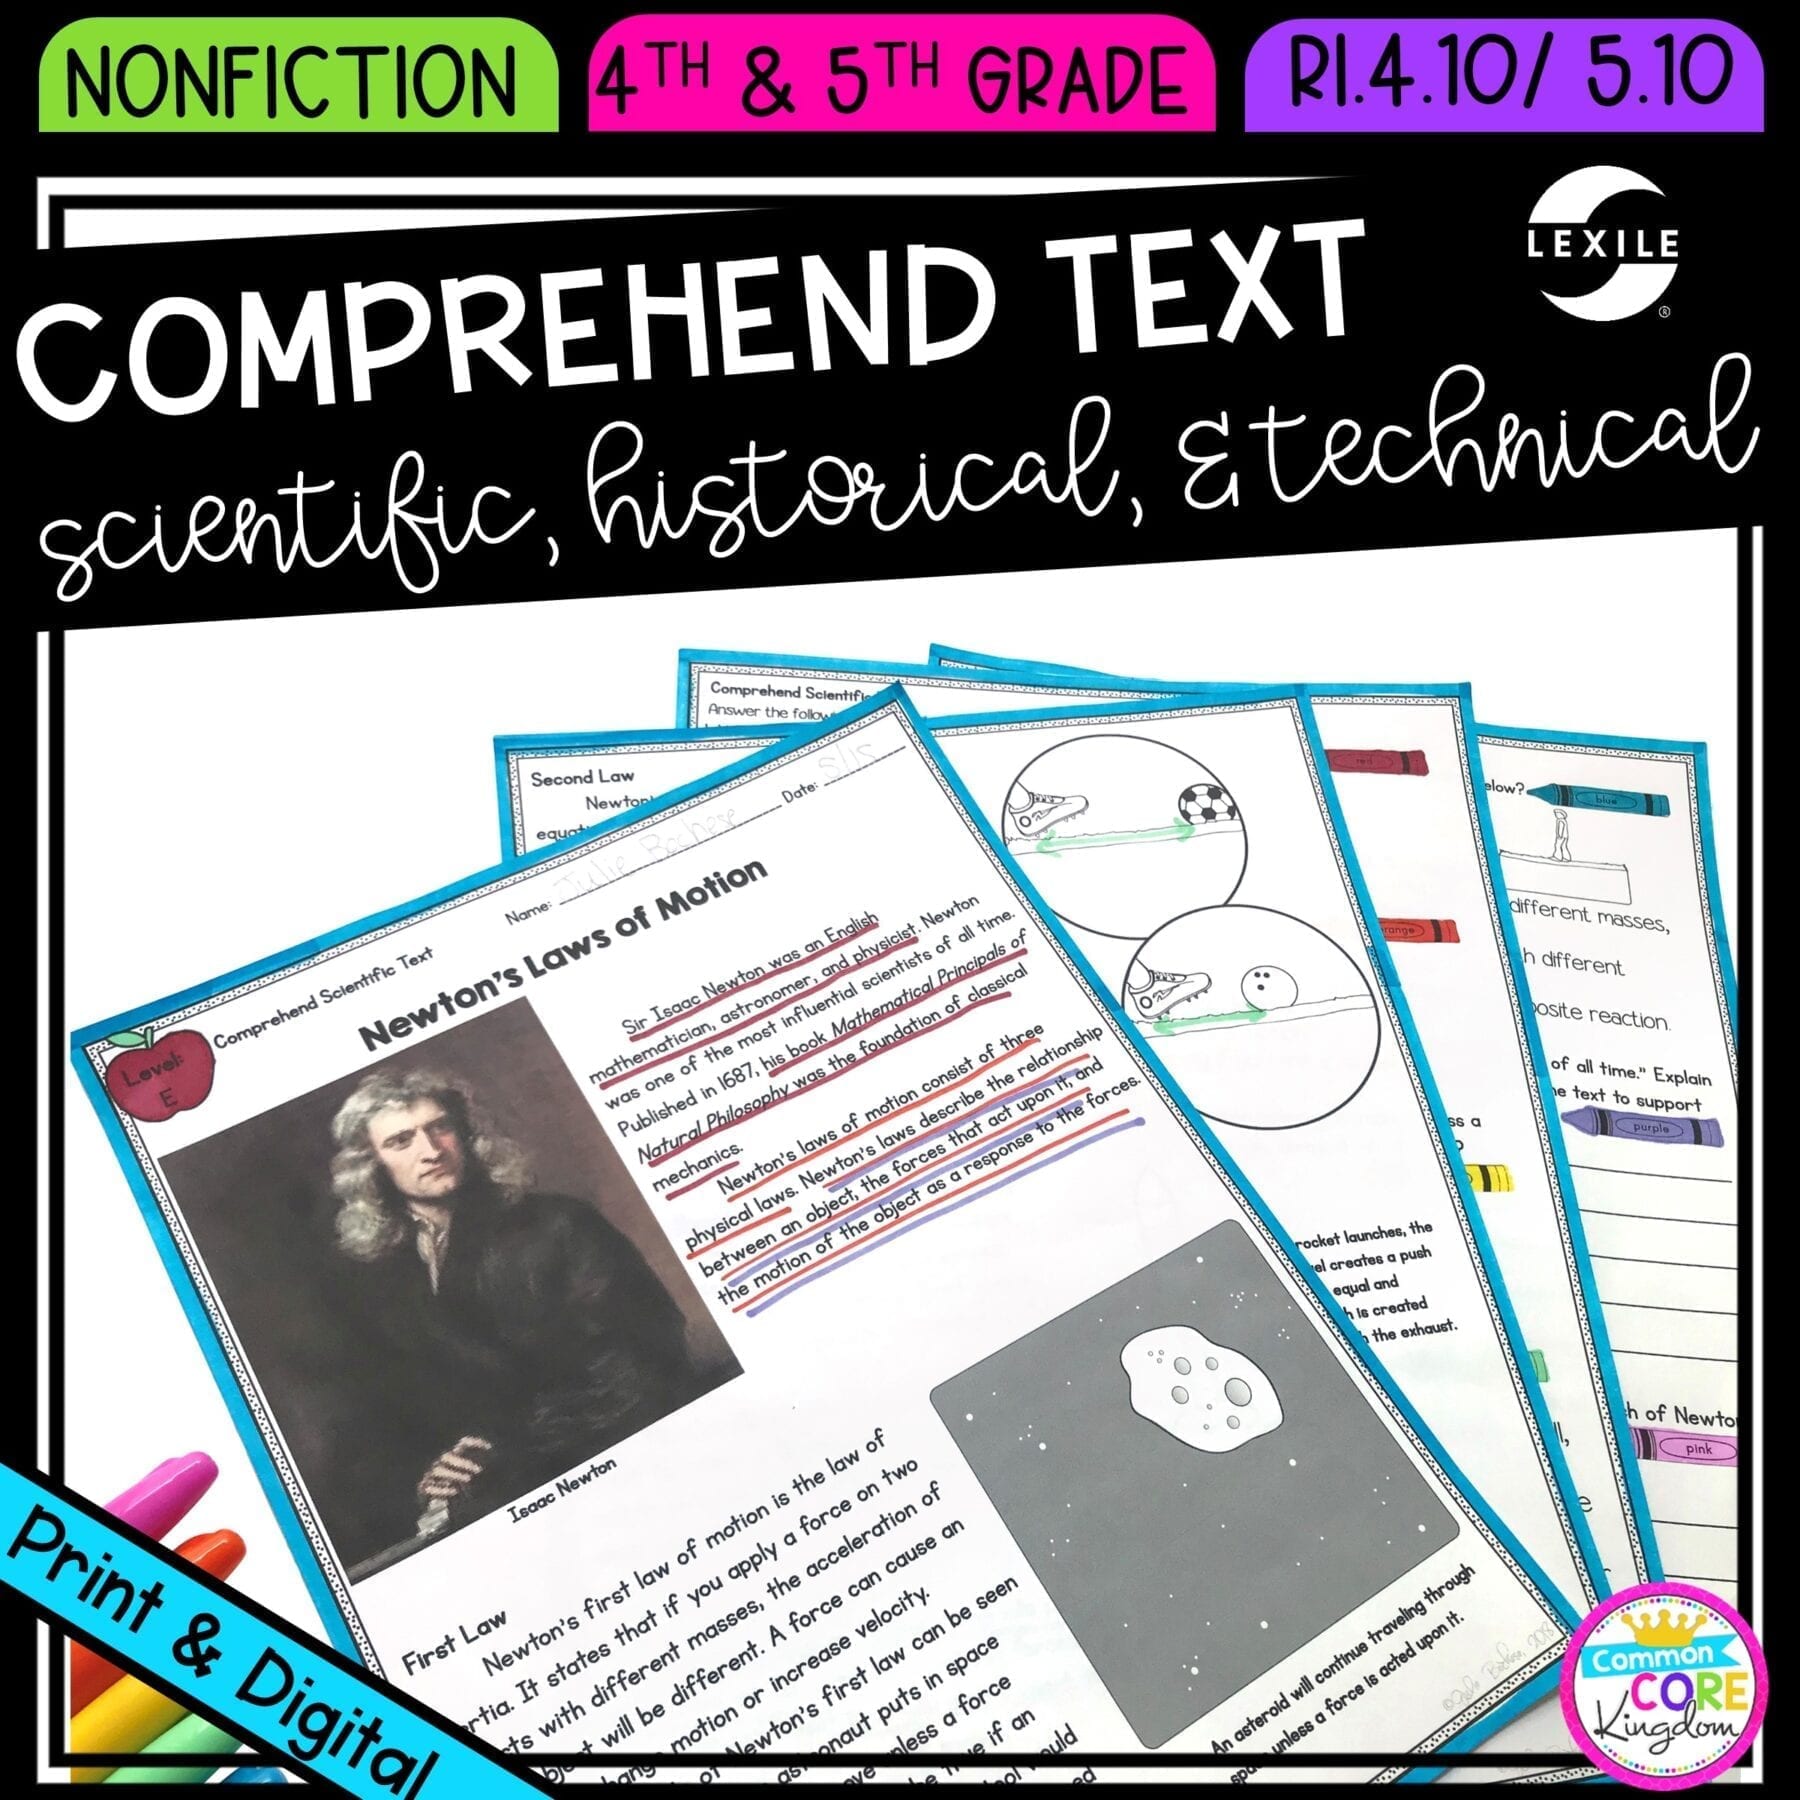 Reading Comprehension in Nonfiction for 4th & 5th grade cover showing printable and digital worksheets